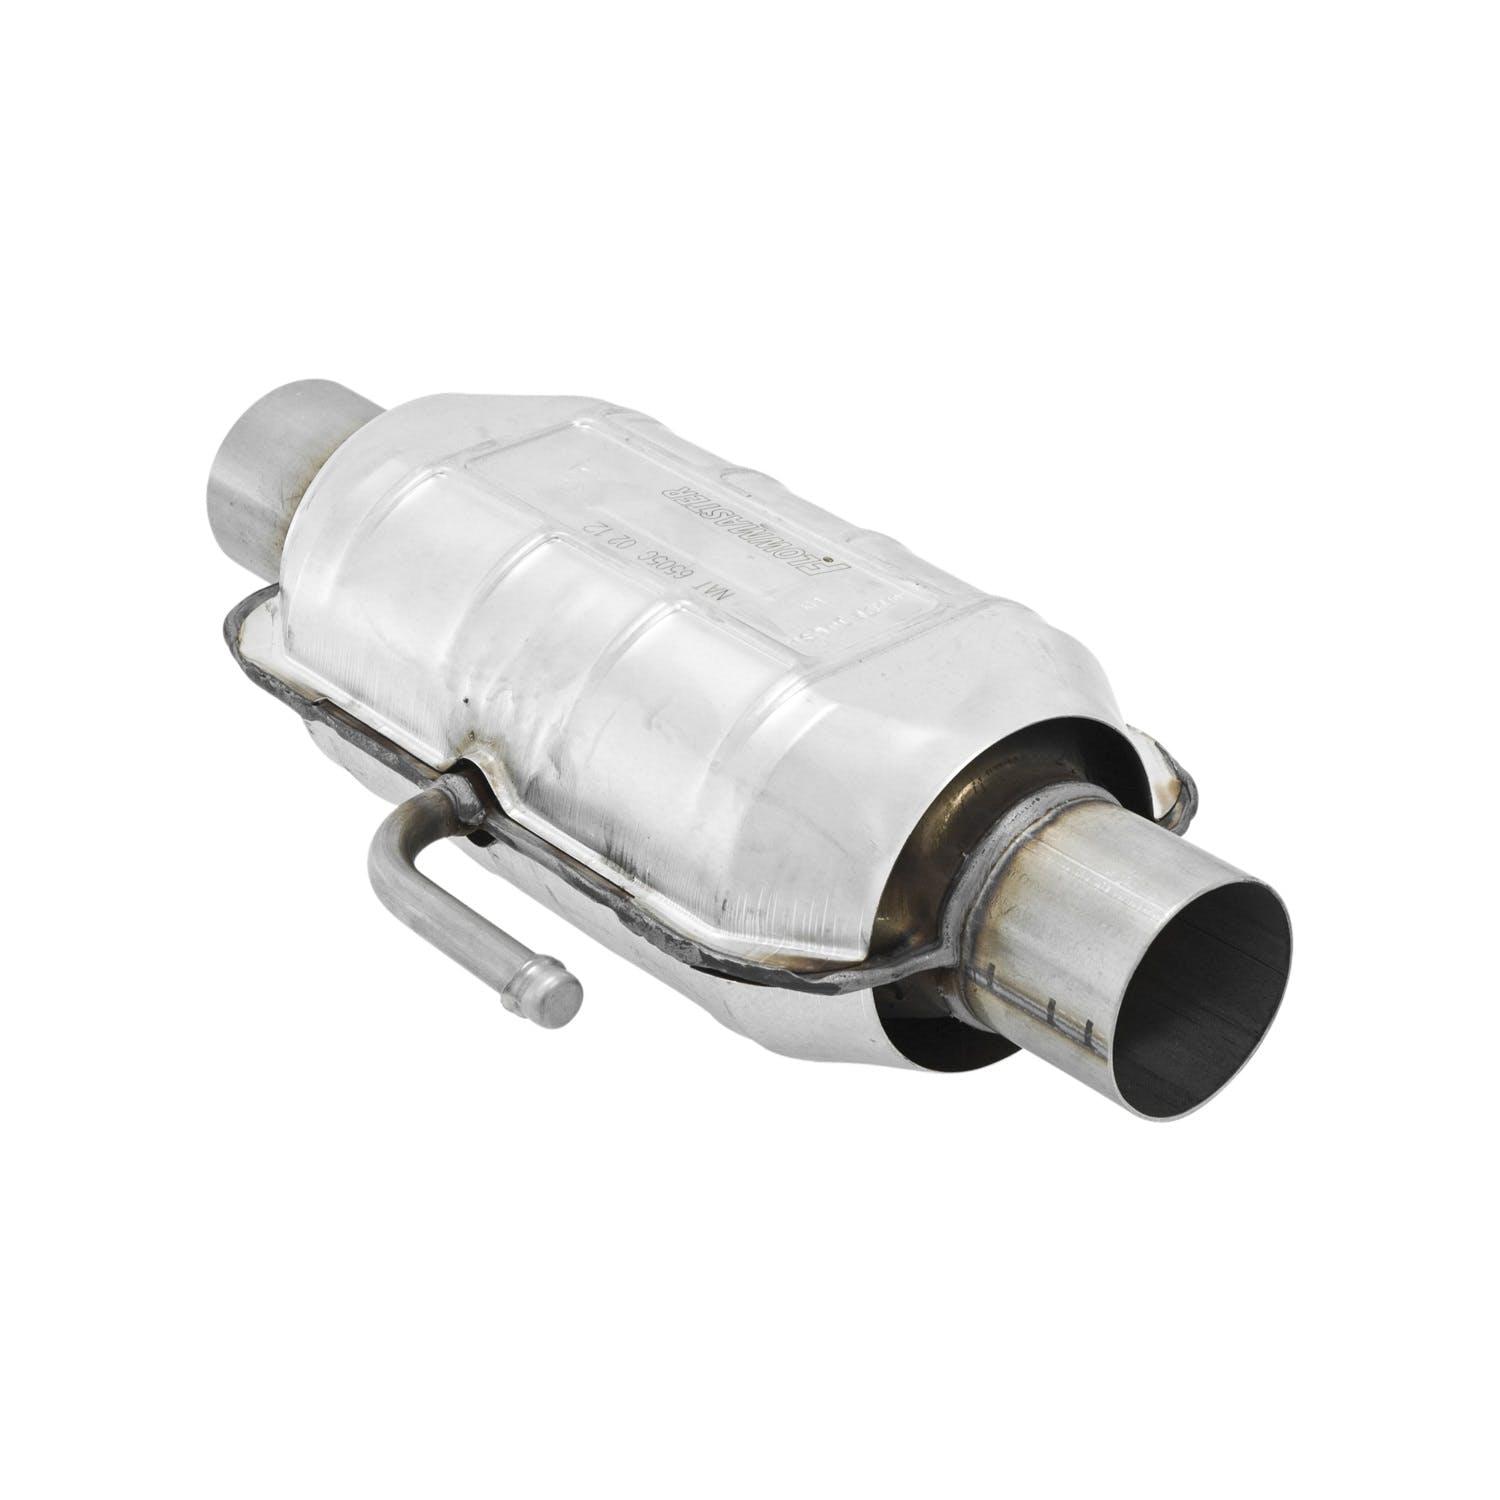 Flowmaster Catalytic Converters 2200125 Catalytic Converter-Universal-220 Series-2.50 in. Inlet/Outlet-49 State